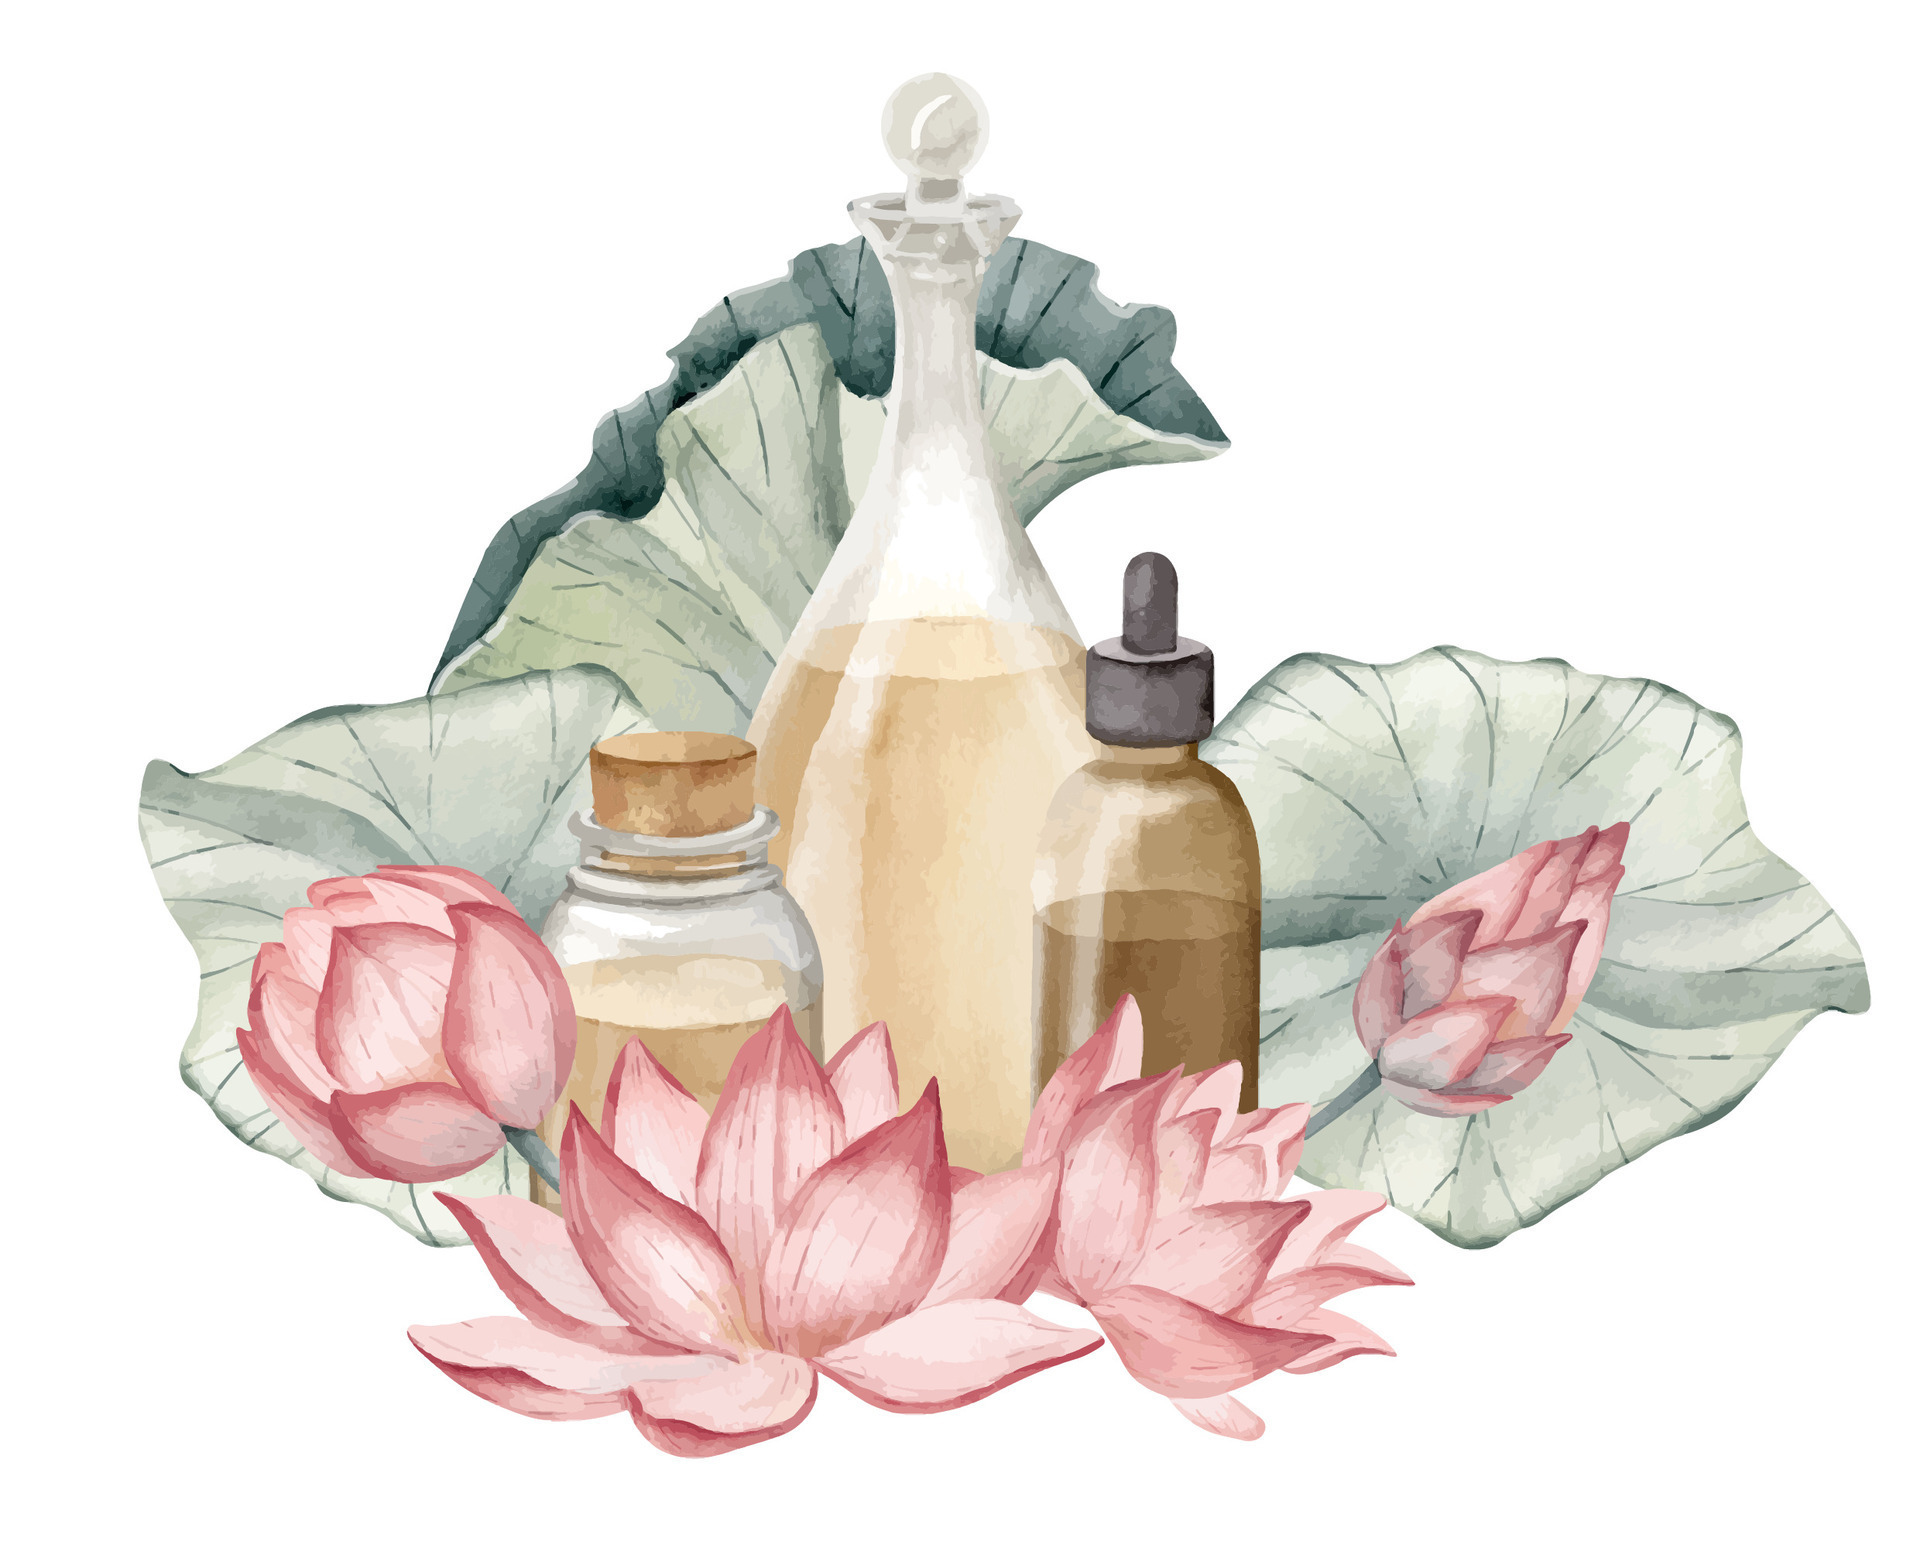 Pink Peony Flowers And Aroma Essential Oil Bottle Hand Drawn Watercolor  Illustration Isolated On White Background Stock Illustration - Download  Image Now - iStock